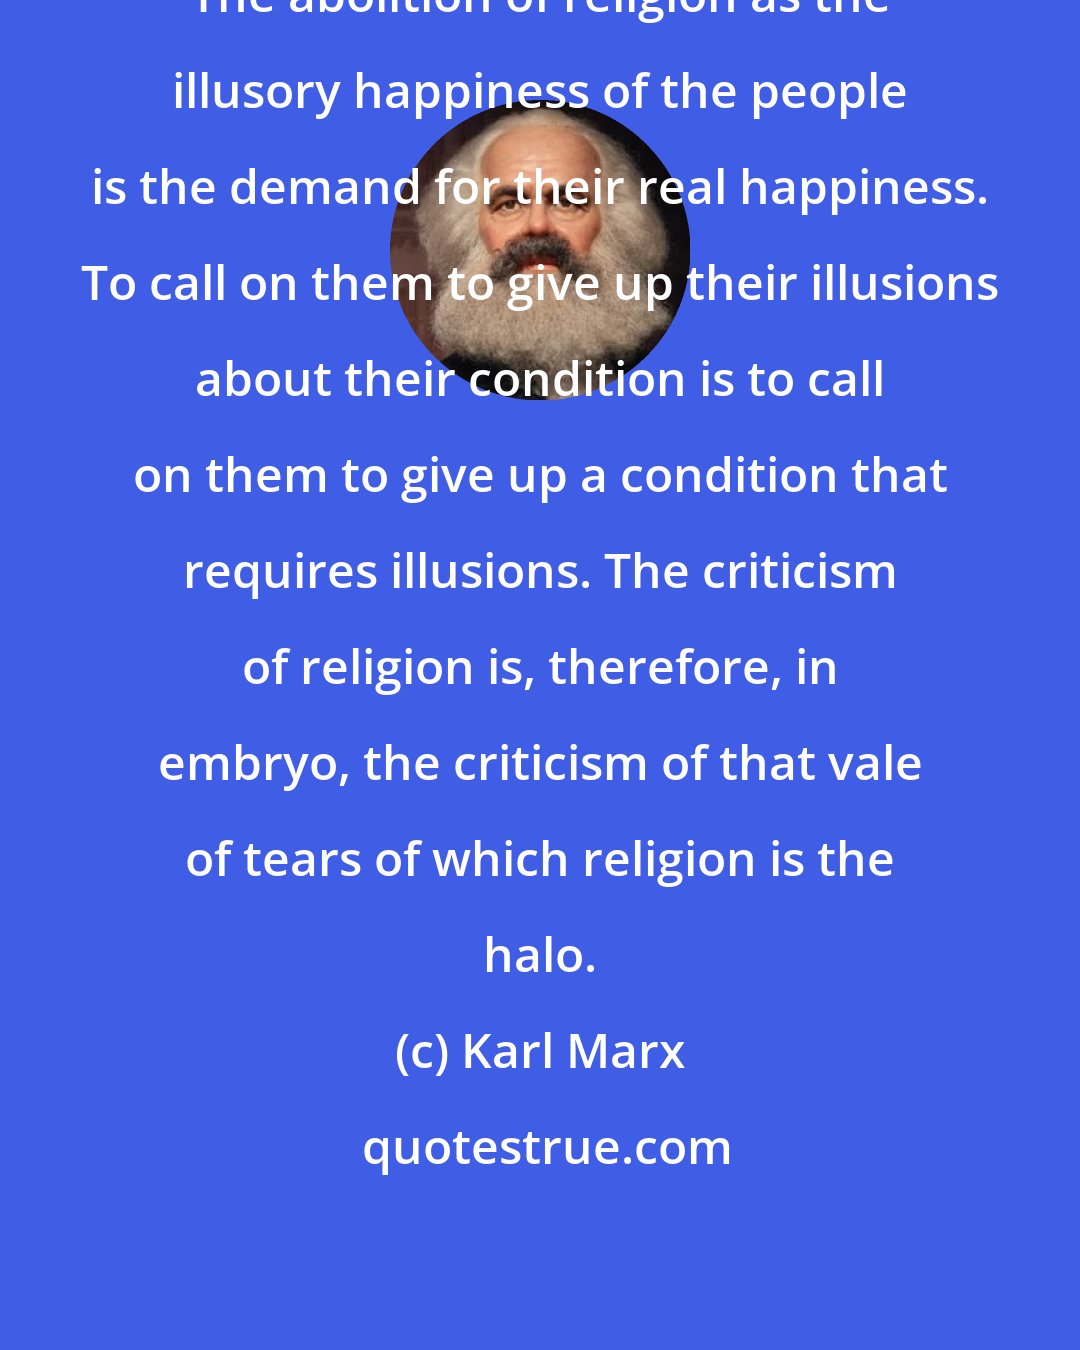 Karl Marx: The abolition of religion as the illusory happiness of the people is the demand for their real happiness. To call on them to give up their illusions about their condition is to call on them to give up a condition that requires illusions. The criticism of religion is, therefore, in embryo, the criticism of that vale of tears of which religion is the halo.